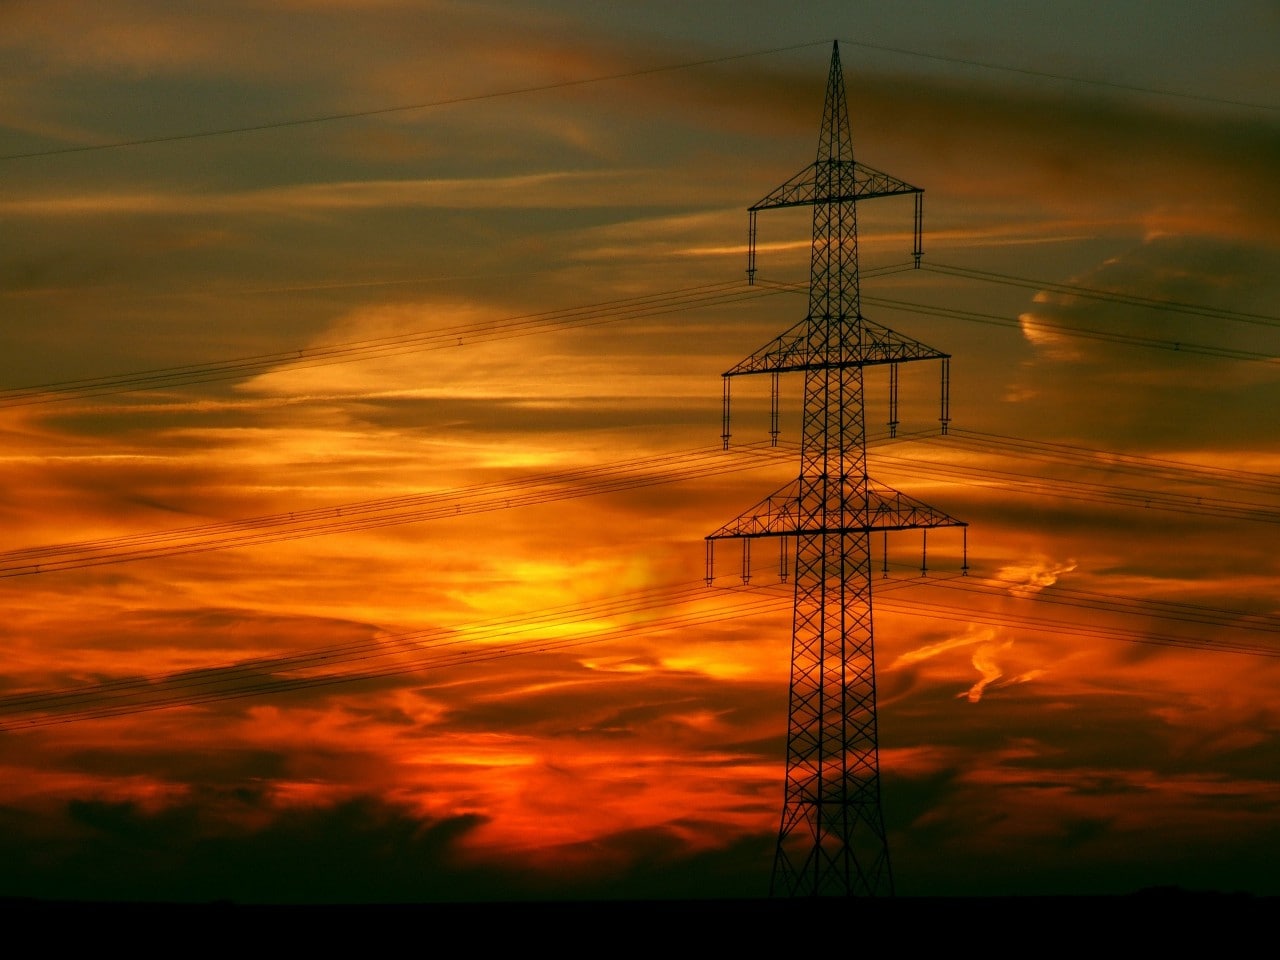 Power poles seen at sunset, representing the energy market.